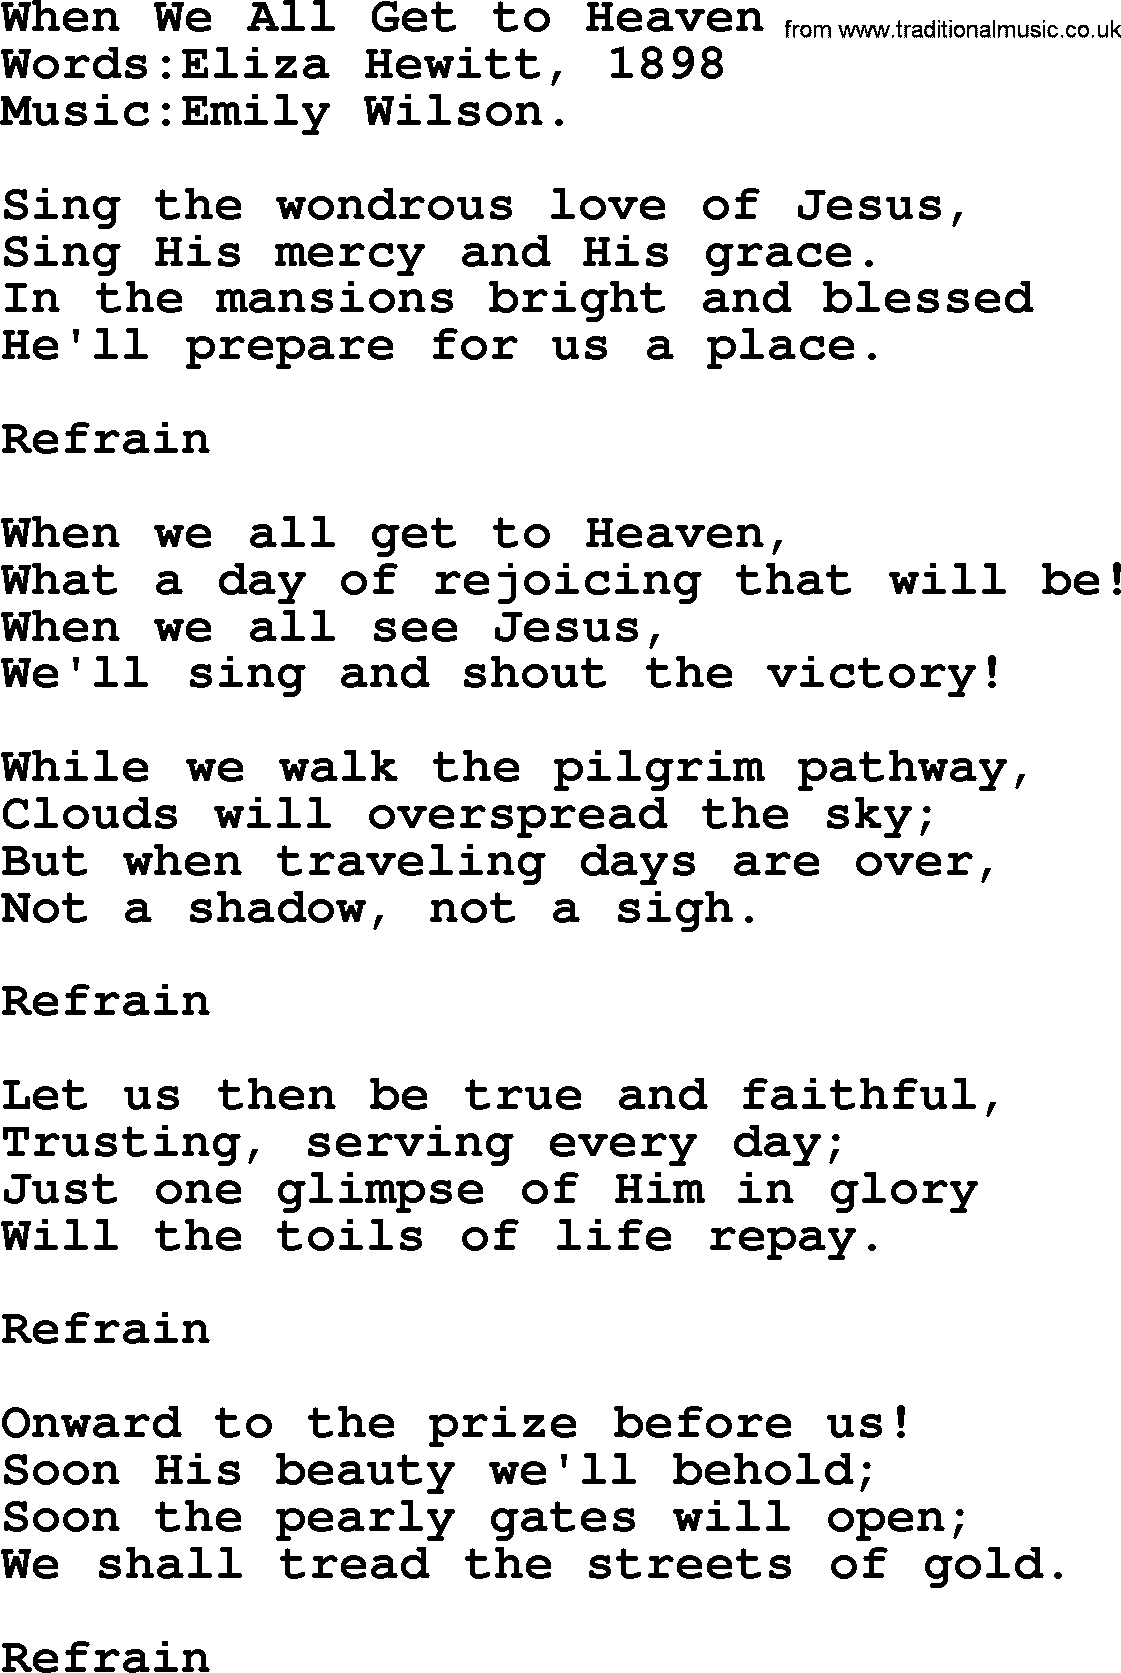 Songs and Hymns about Heaven: When We All Get To Heaven lyrics with PDF